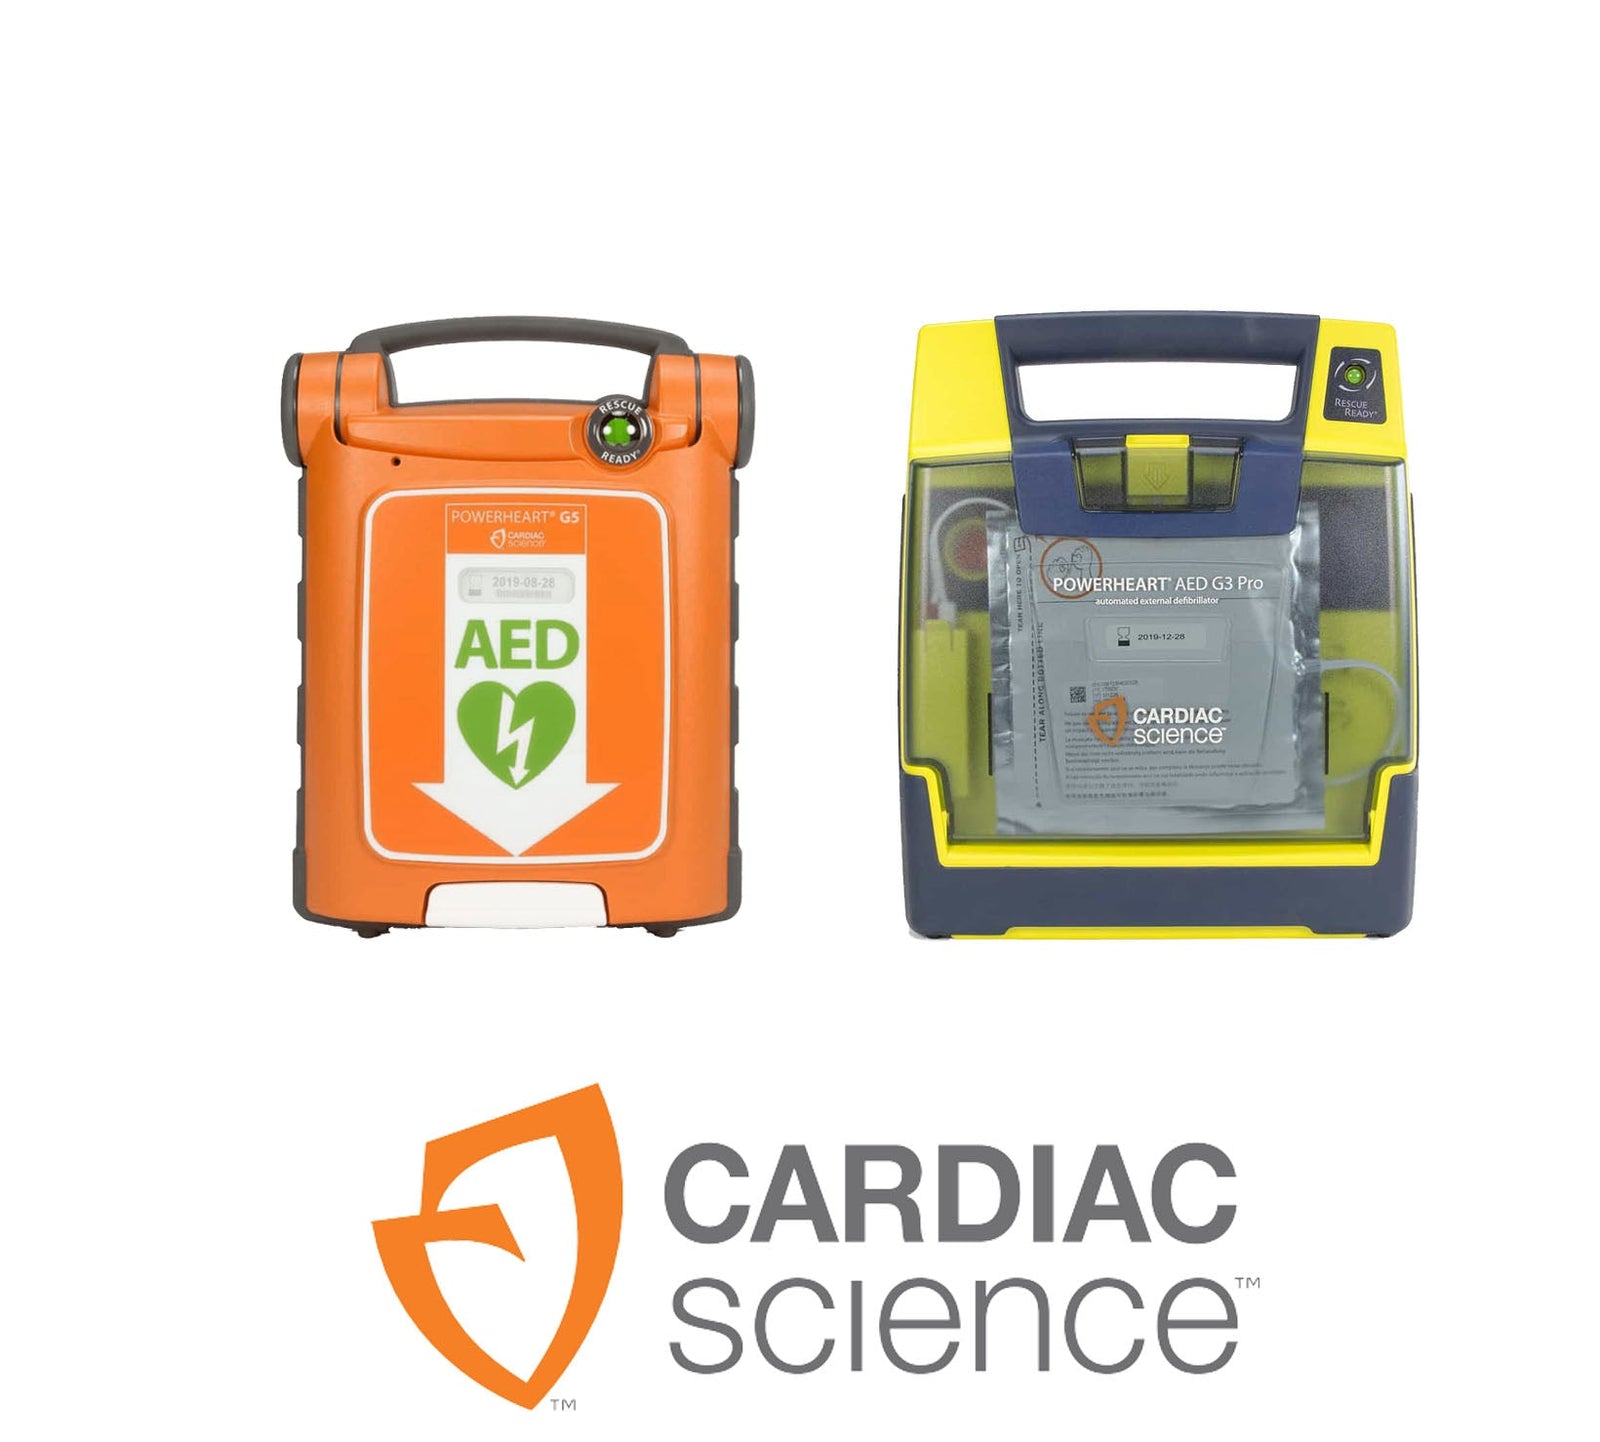 Cardiac Science G5 Designed for first-time responders as well as experienced rescuers